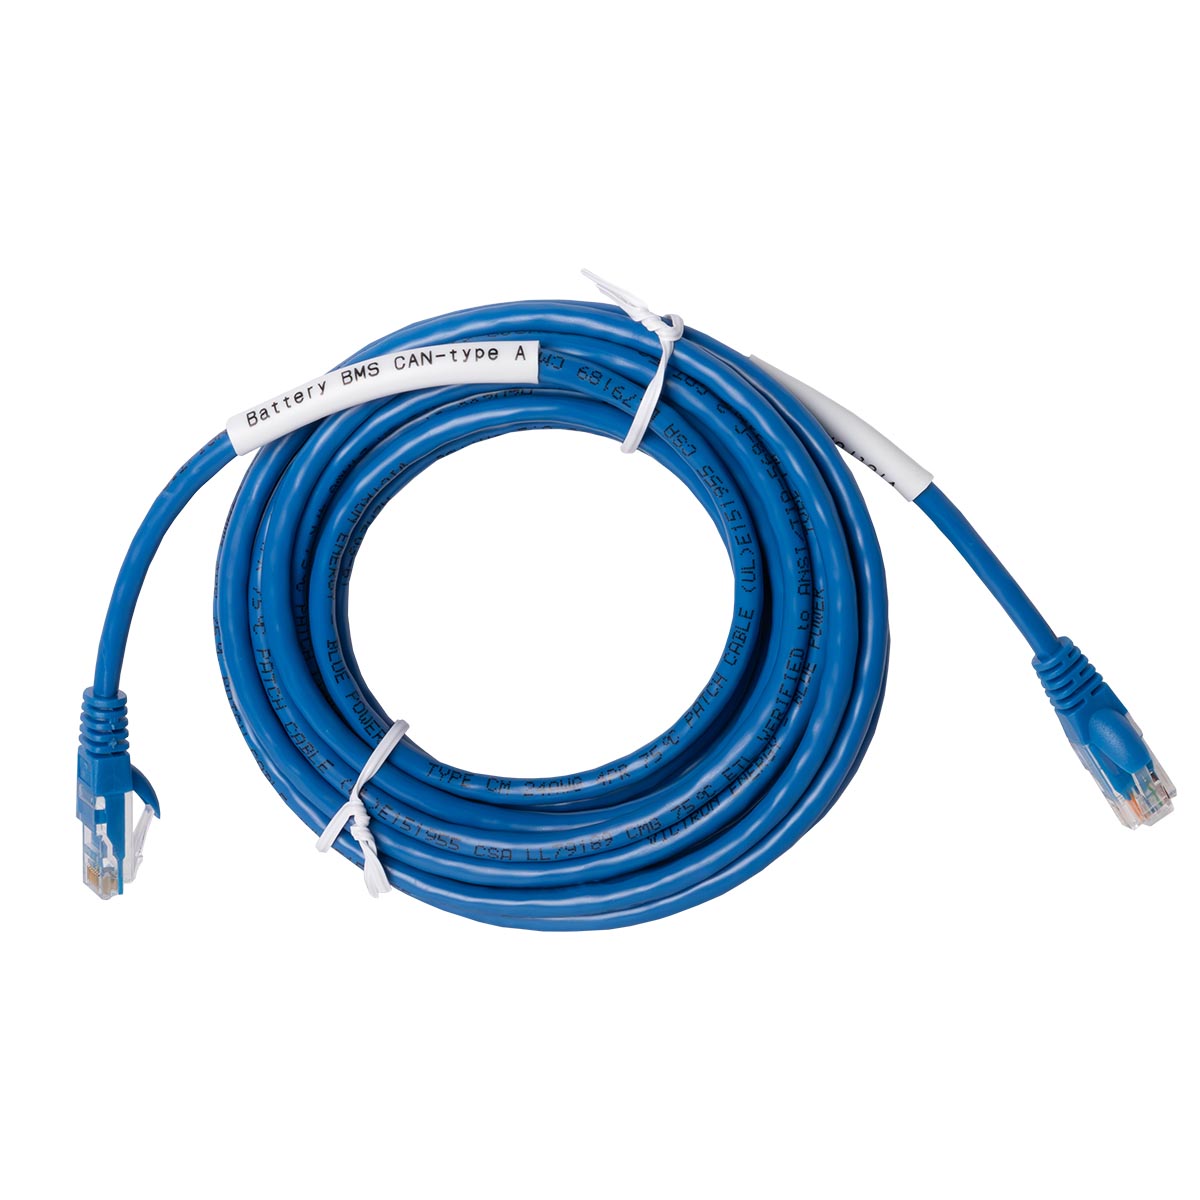 Victron VE.Can to CAN-bus BMS type A Cable 5 m (USt-befreit nach §12 Abs.3 Nr. 1 S.1 UStG)